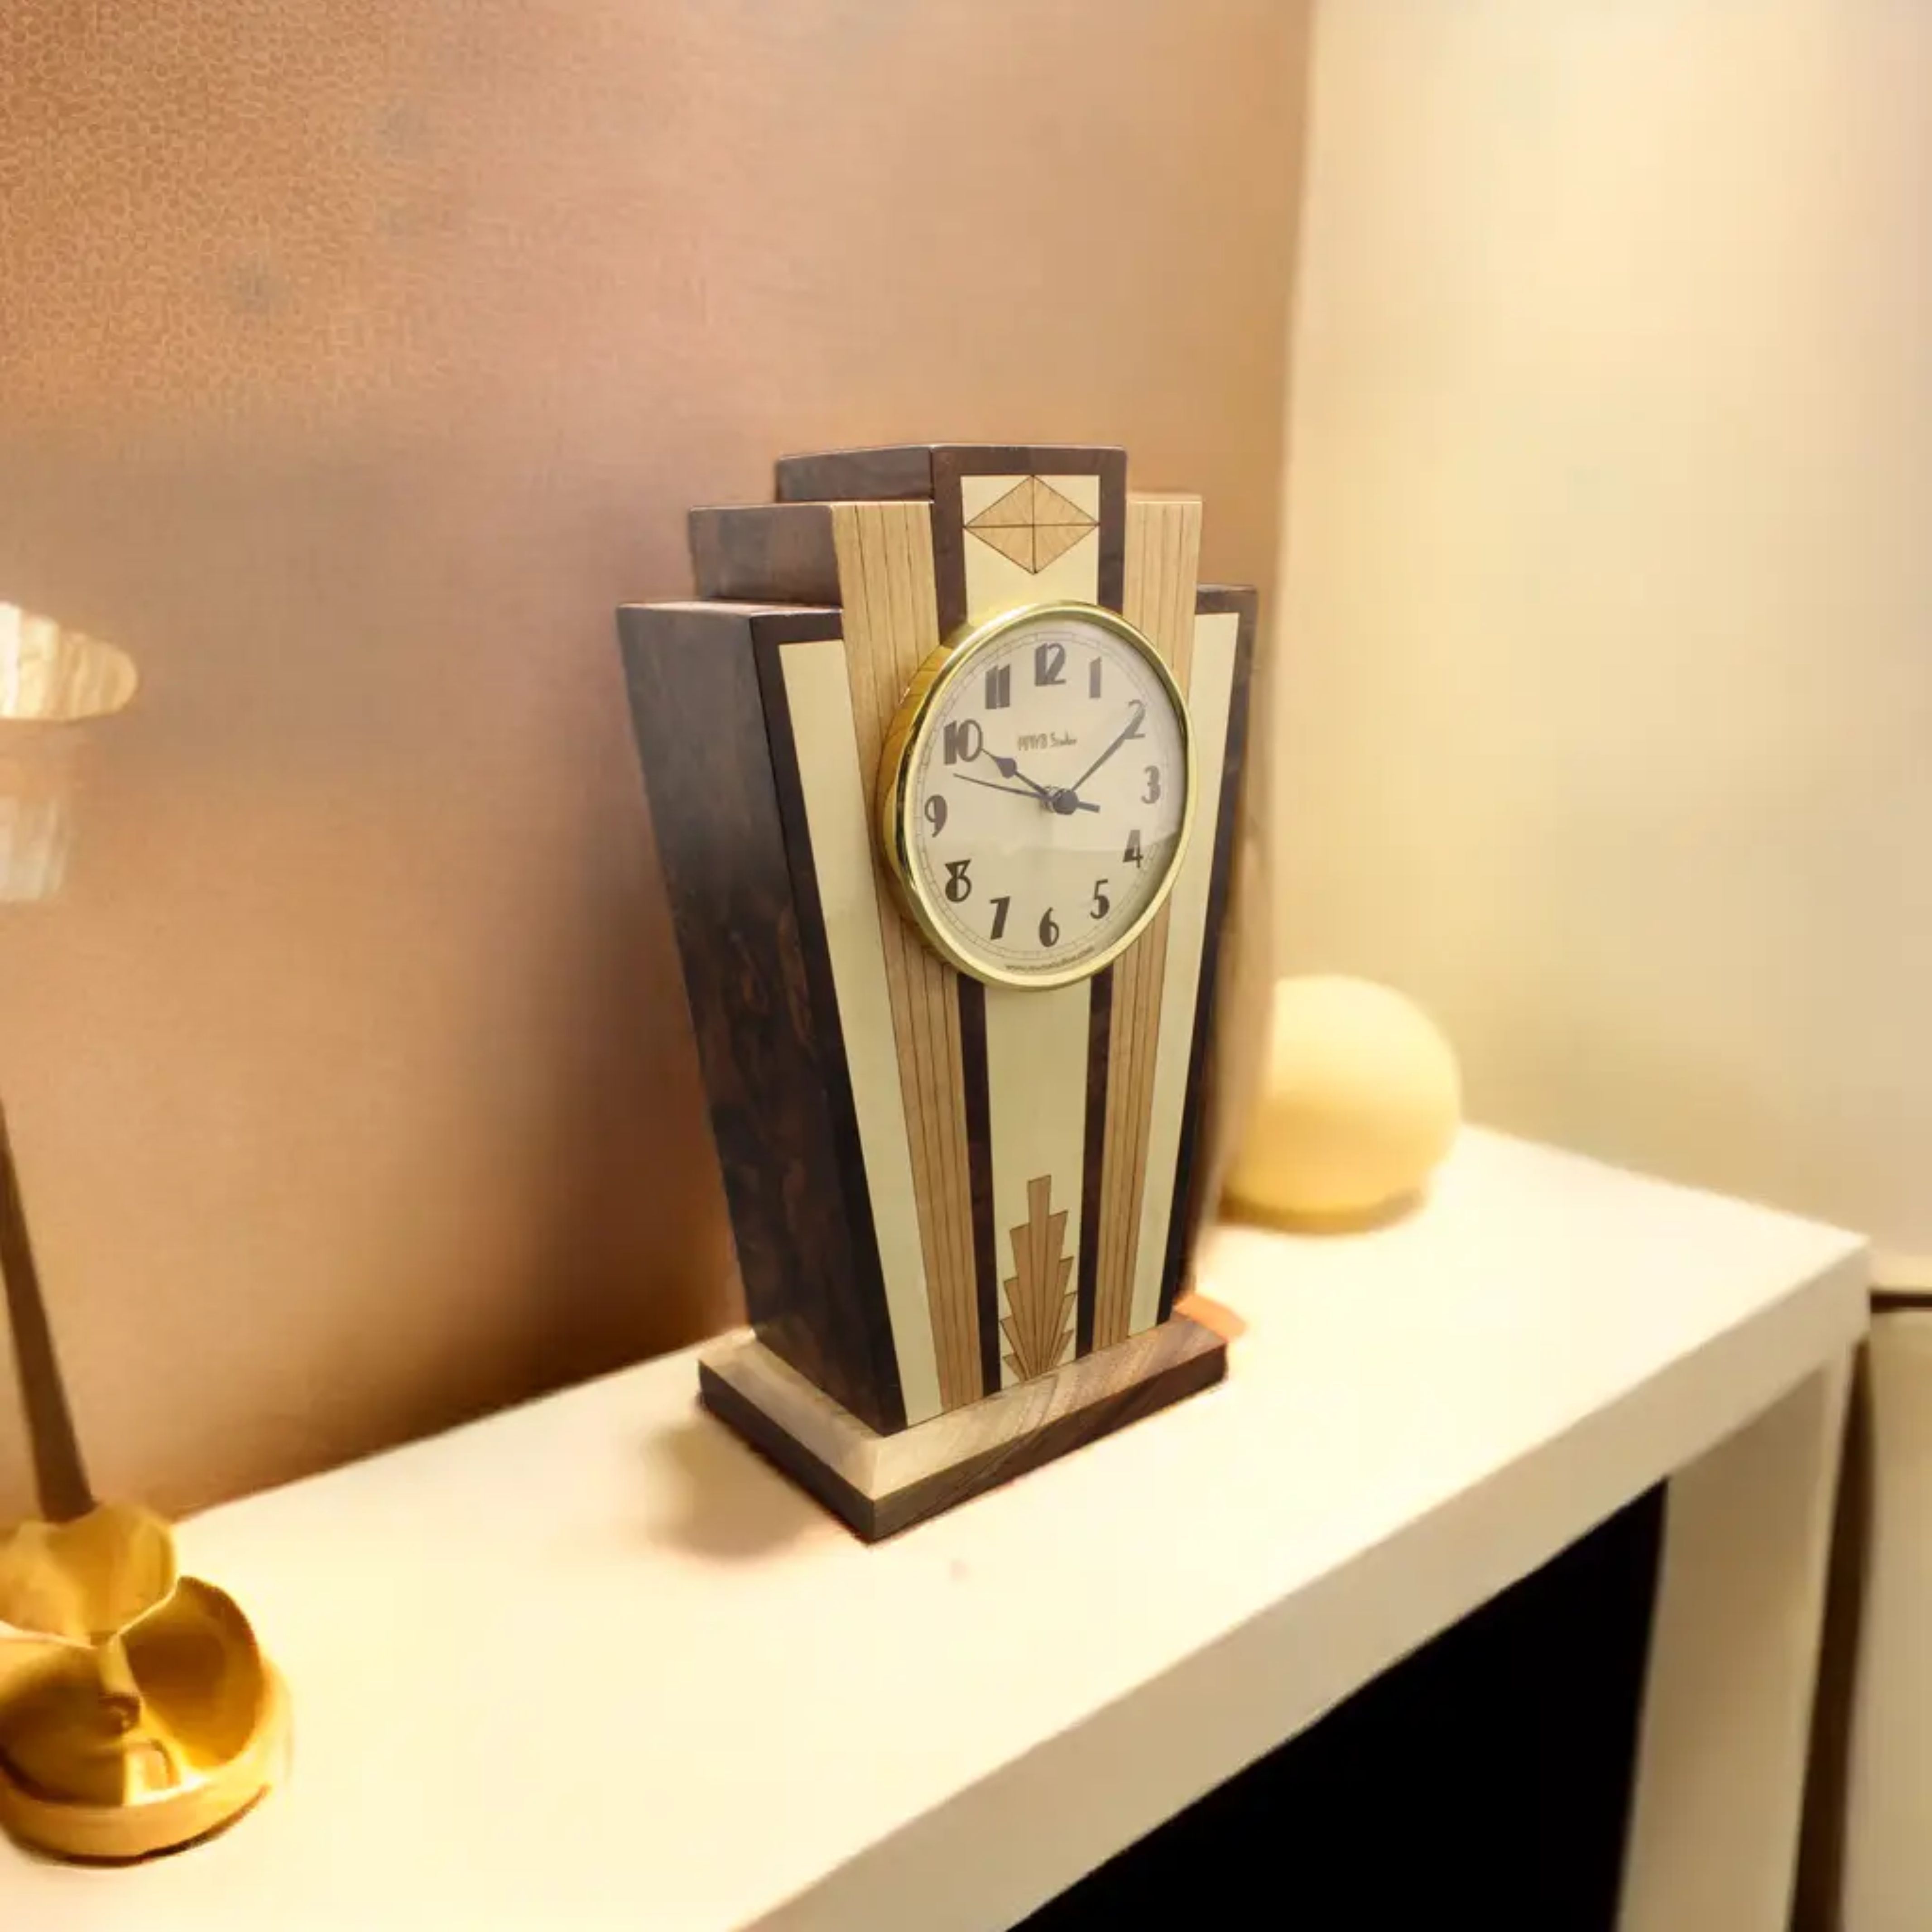 Handcrafted Mantle Clock - Art Deco MC-40 Made in the U.S.